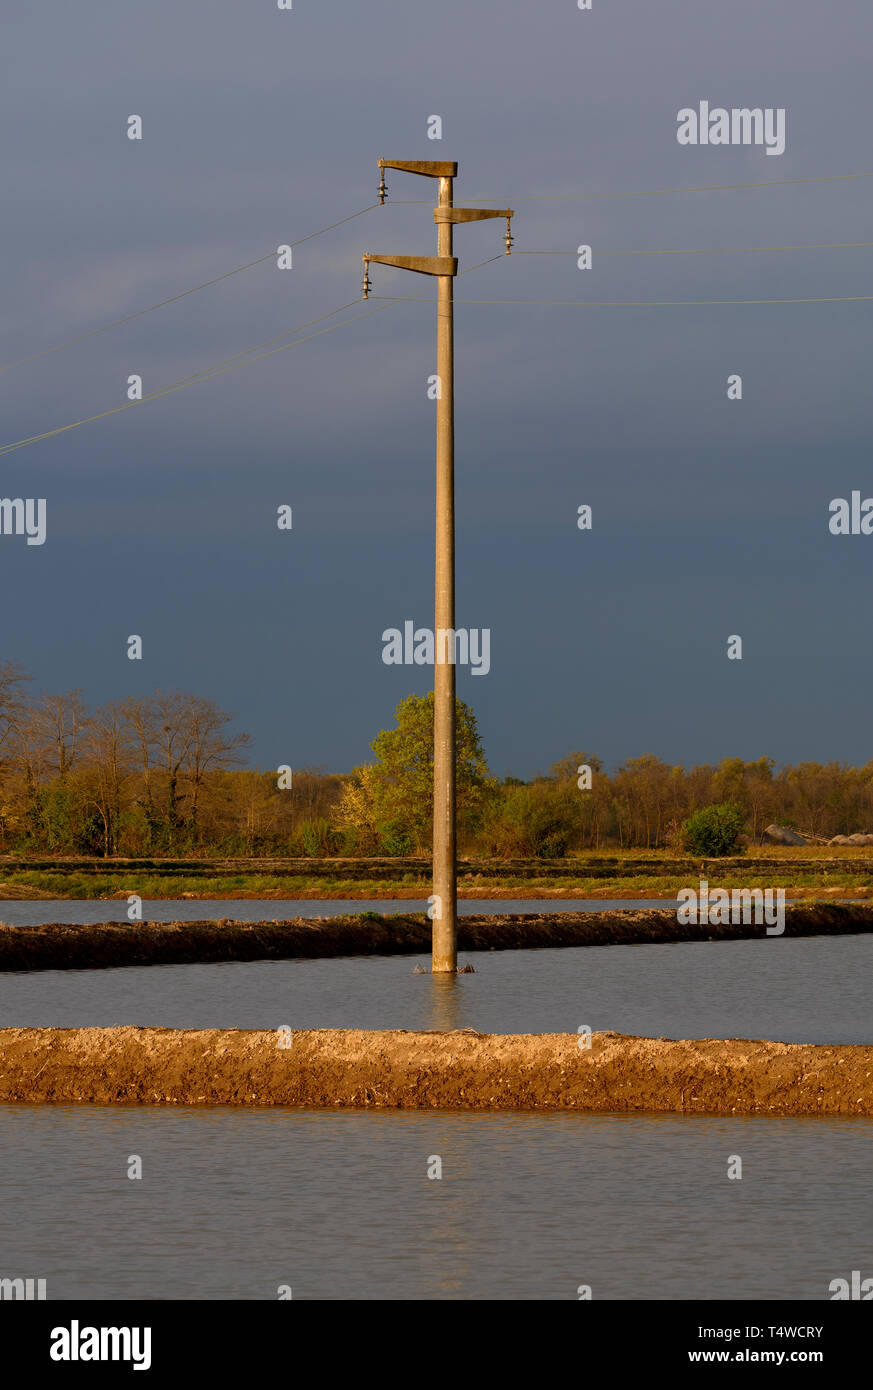 Electricity pole immersed in the water of a rice field Stock Photo